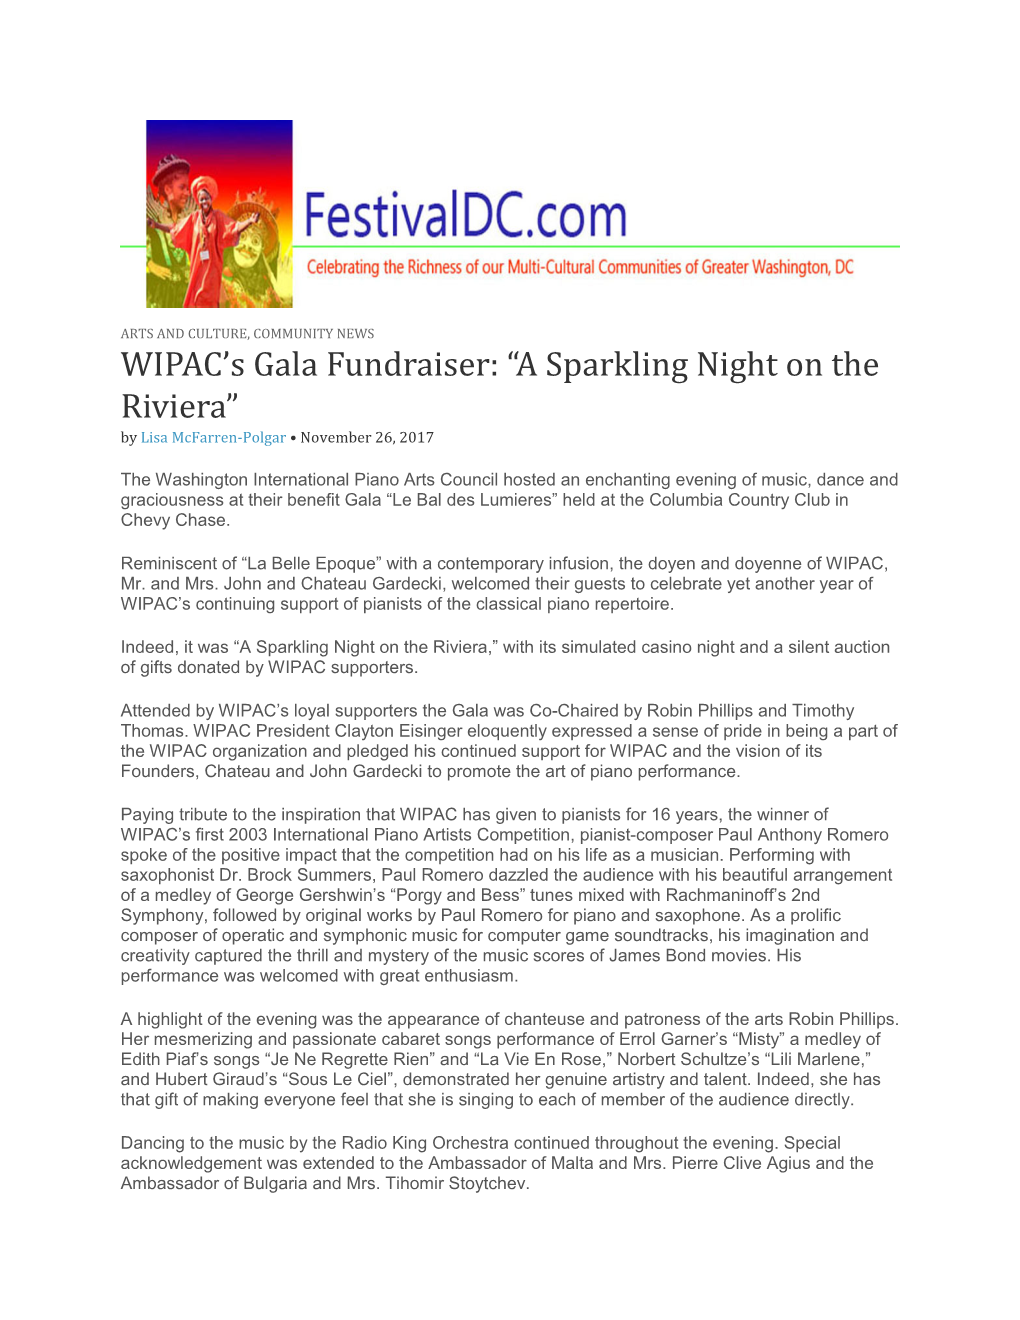 WIPAC's Gala Fundraiser: “A Sparkling Night on the Riviera”